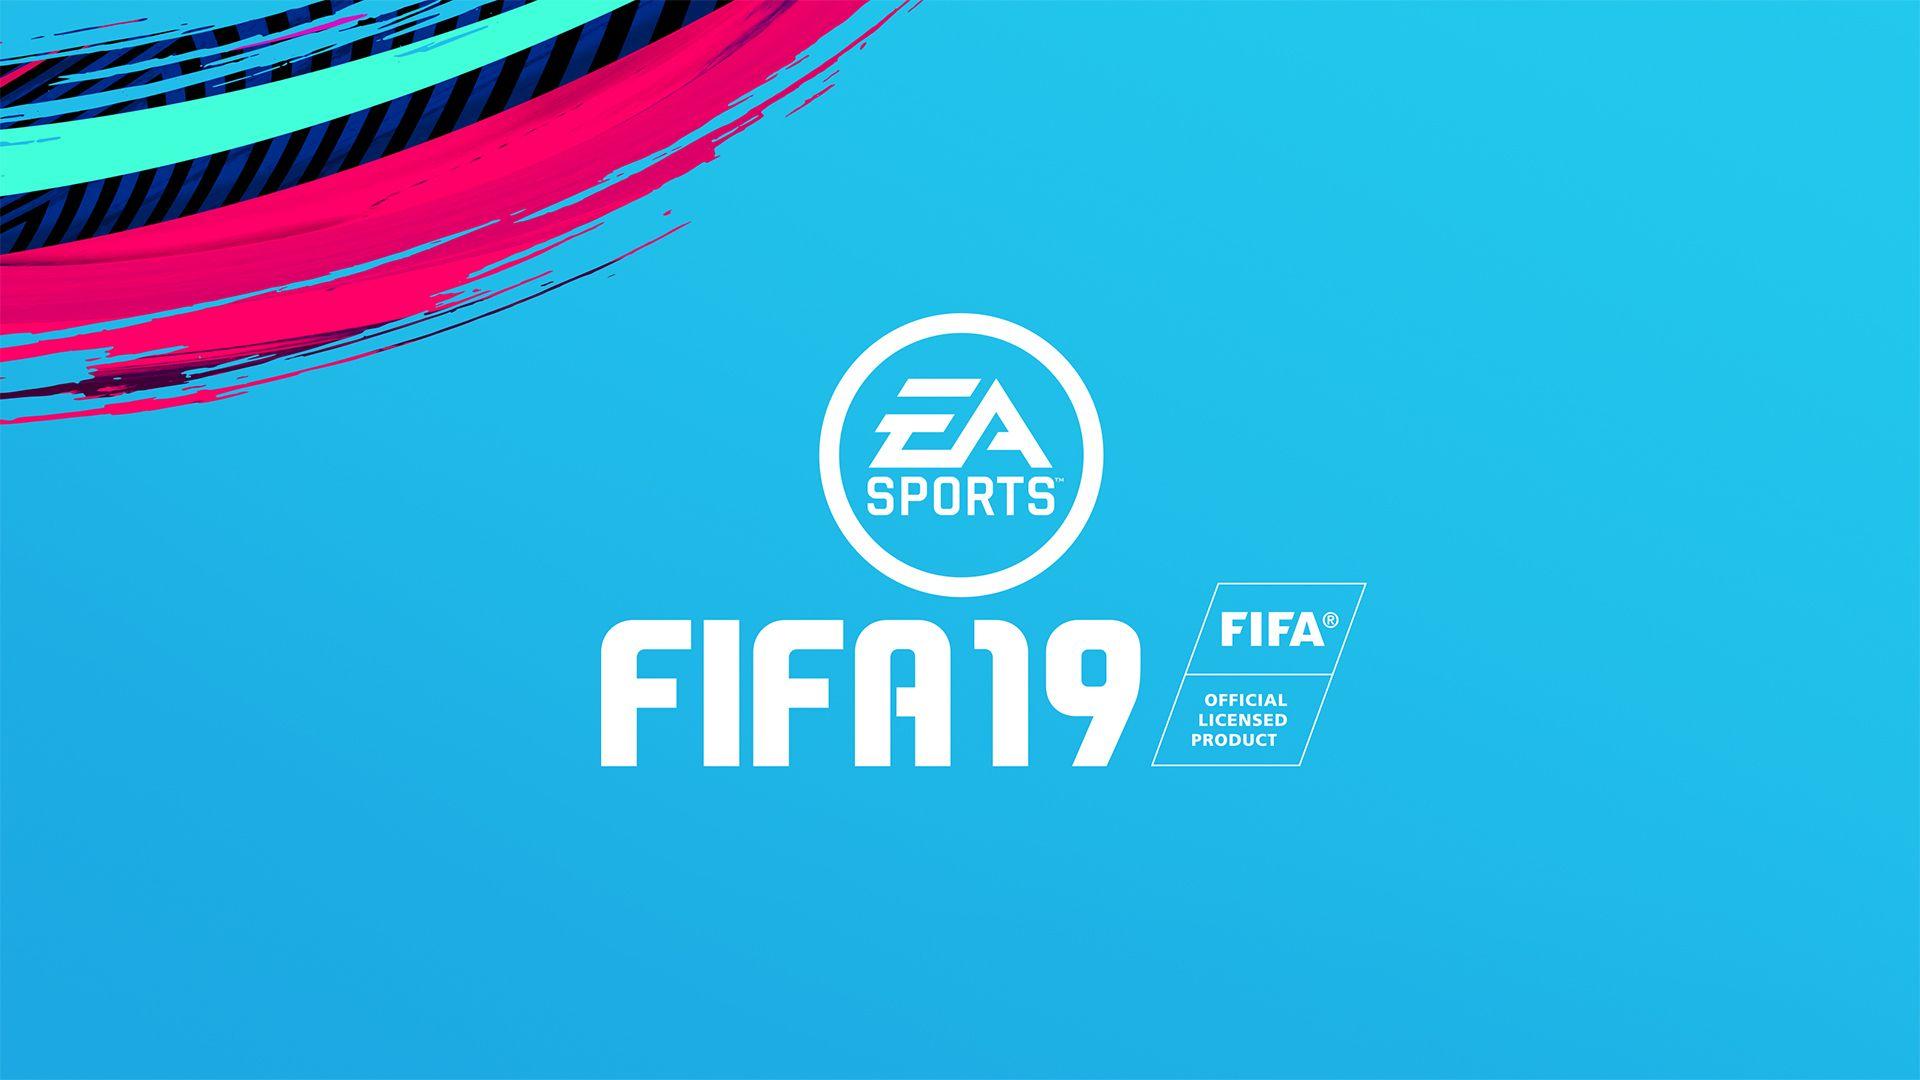 FIFA 19 screenshots, image and picture